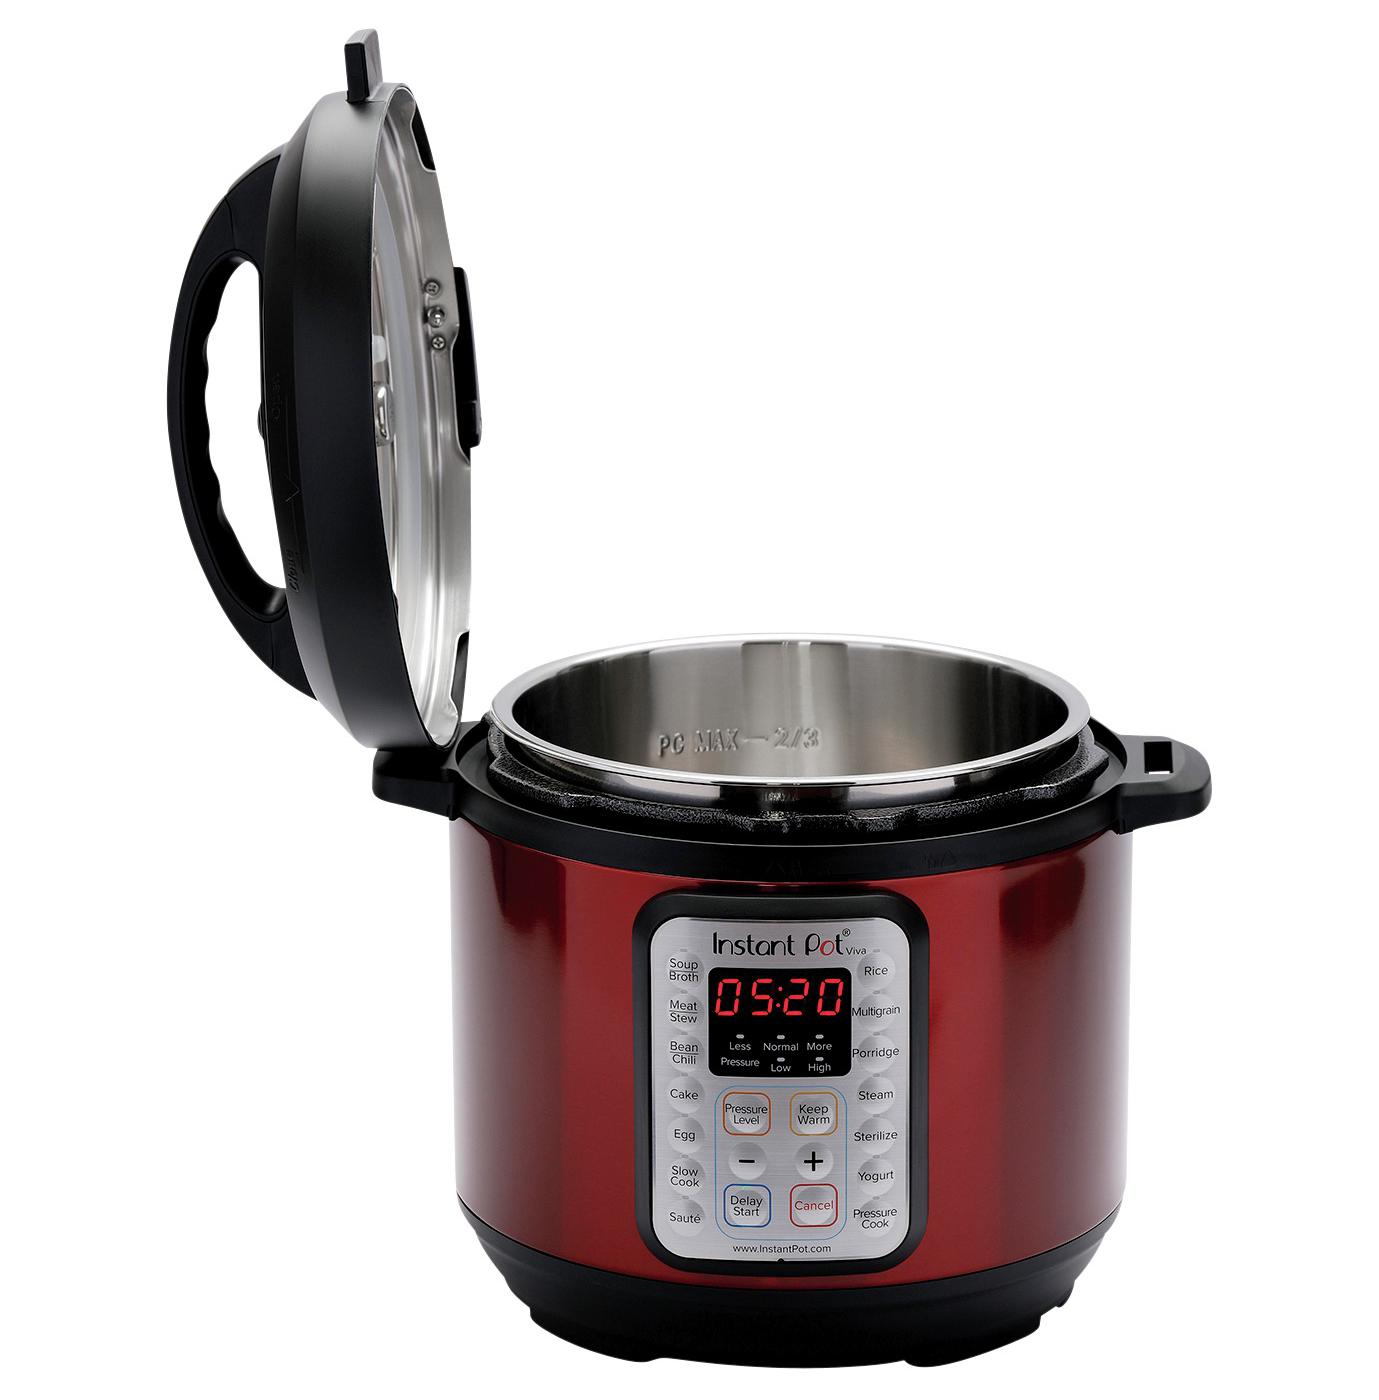 Kitchen & Table by H-E-B Programmable Slow Cooker with Searing Pot - Cloud  White - Shop Cookers & Roasters at H-E-B